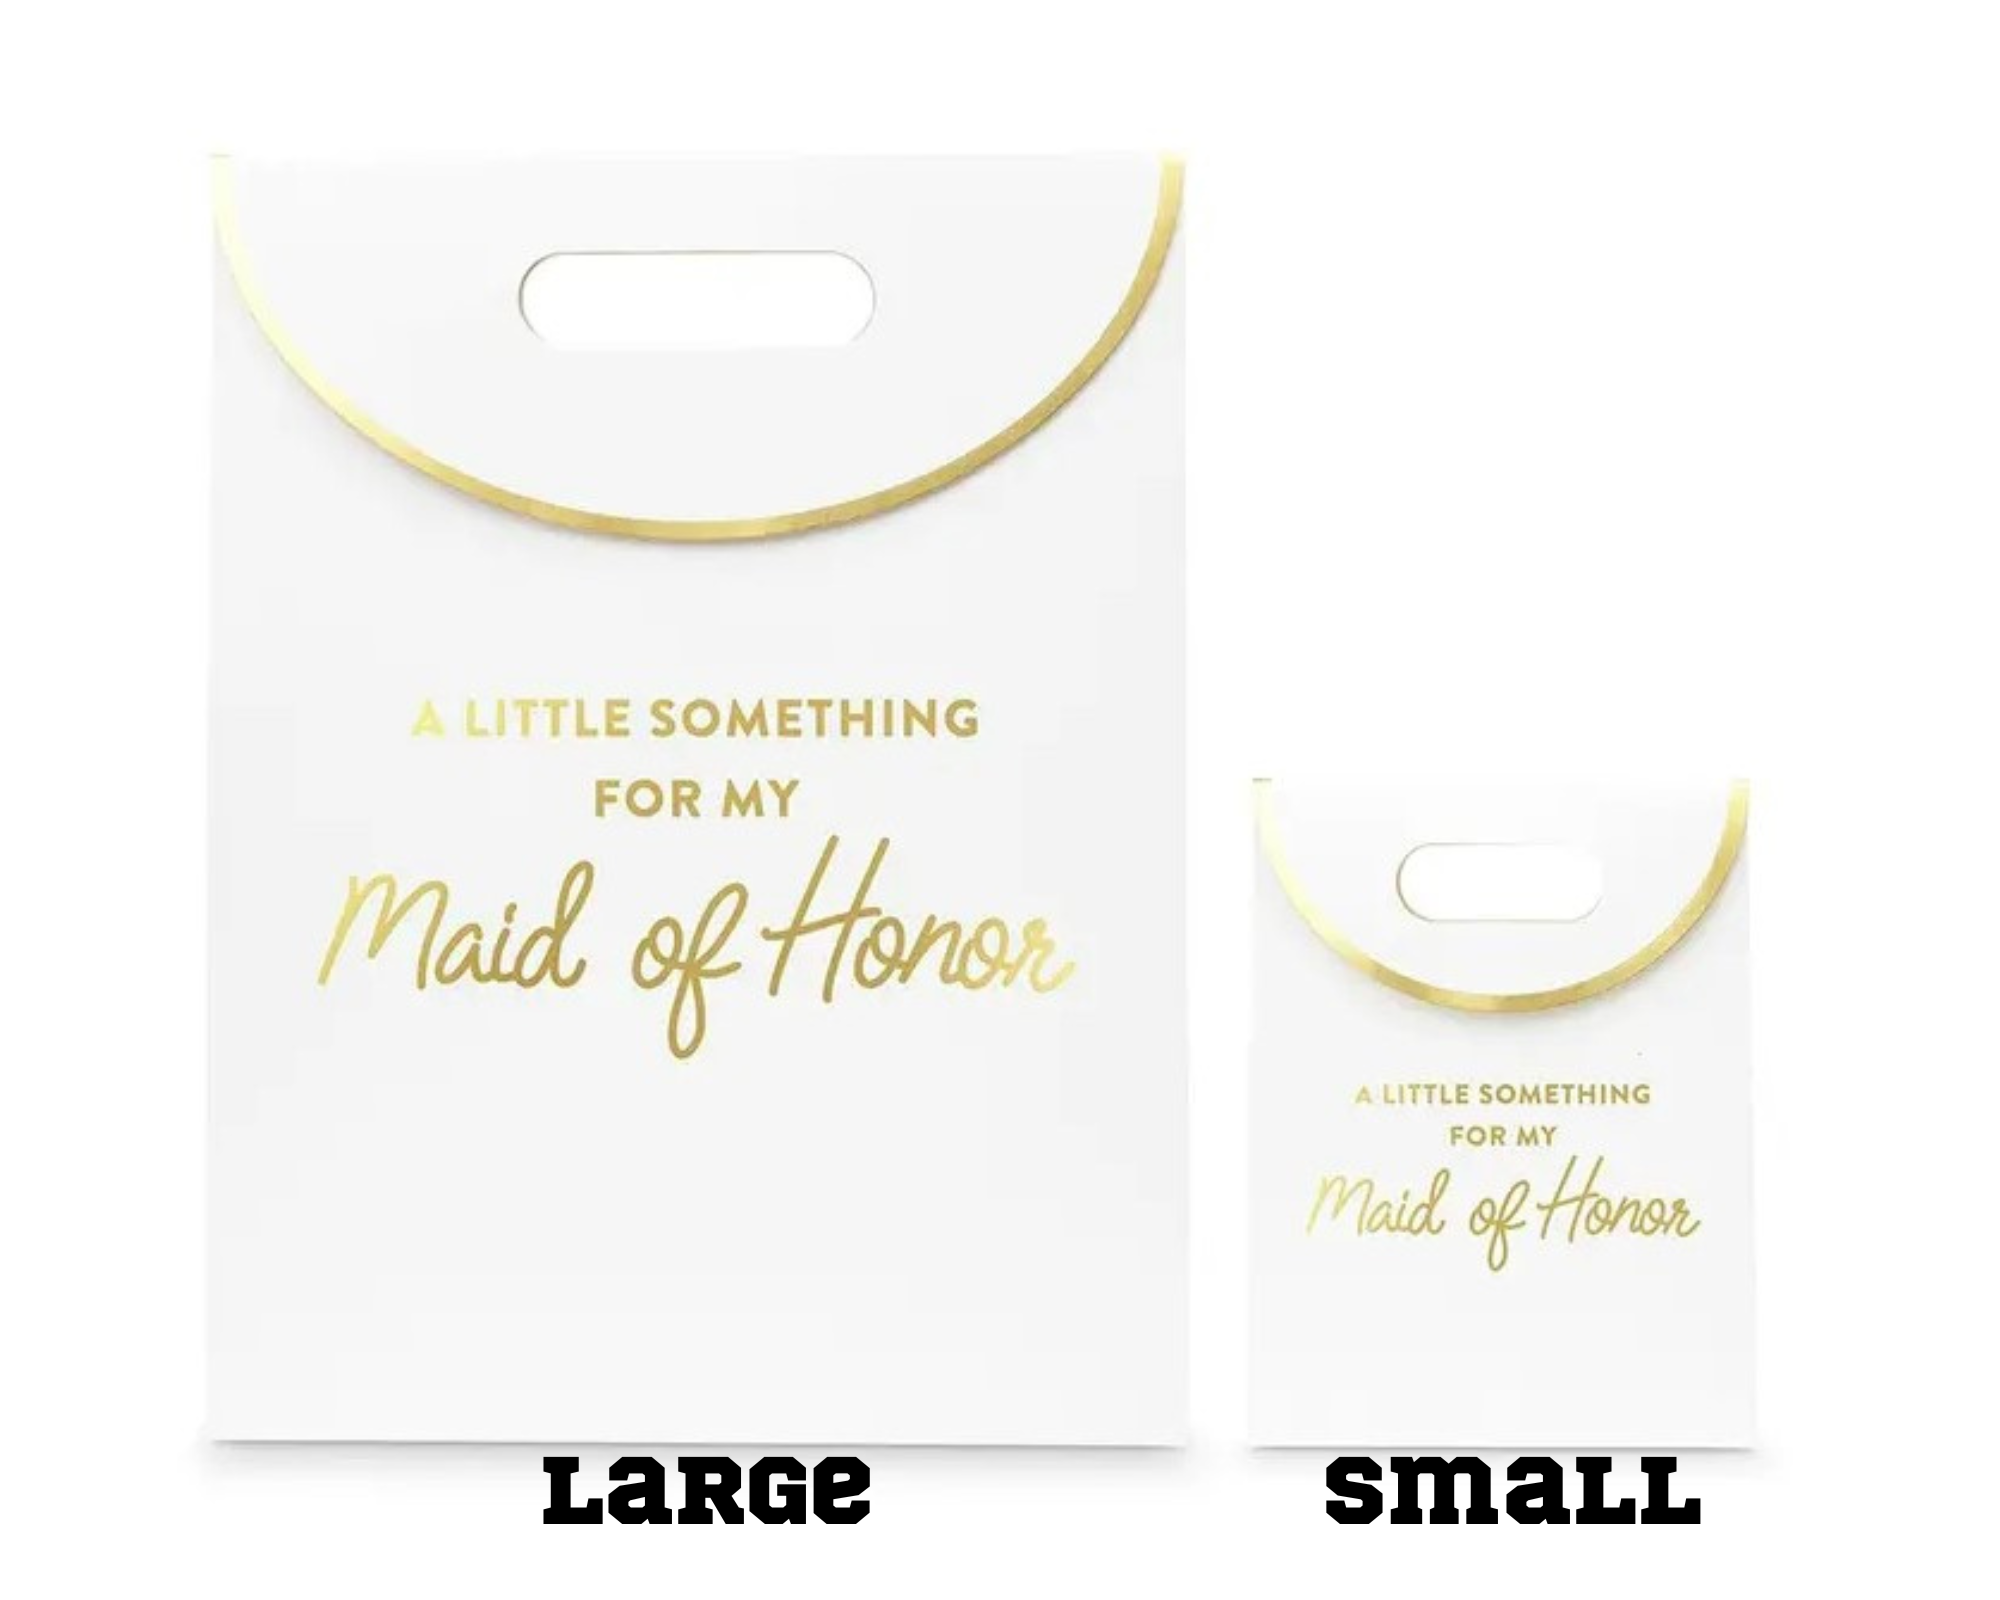 Paper Gift Bag With Handles - For My Bridesmaid or Maid of Honor